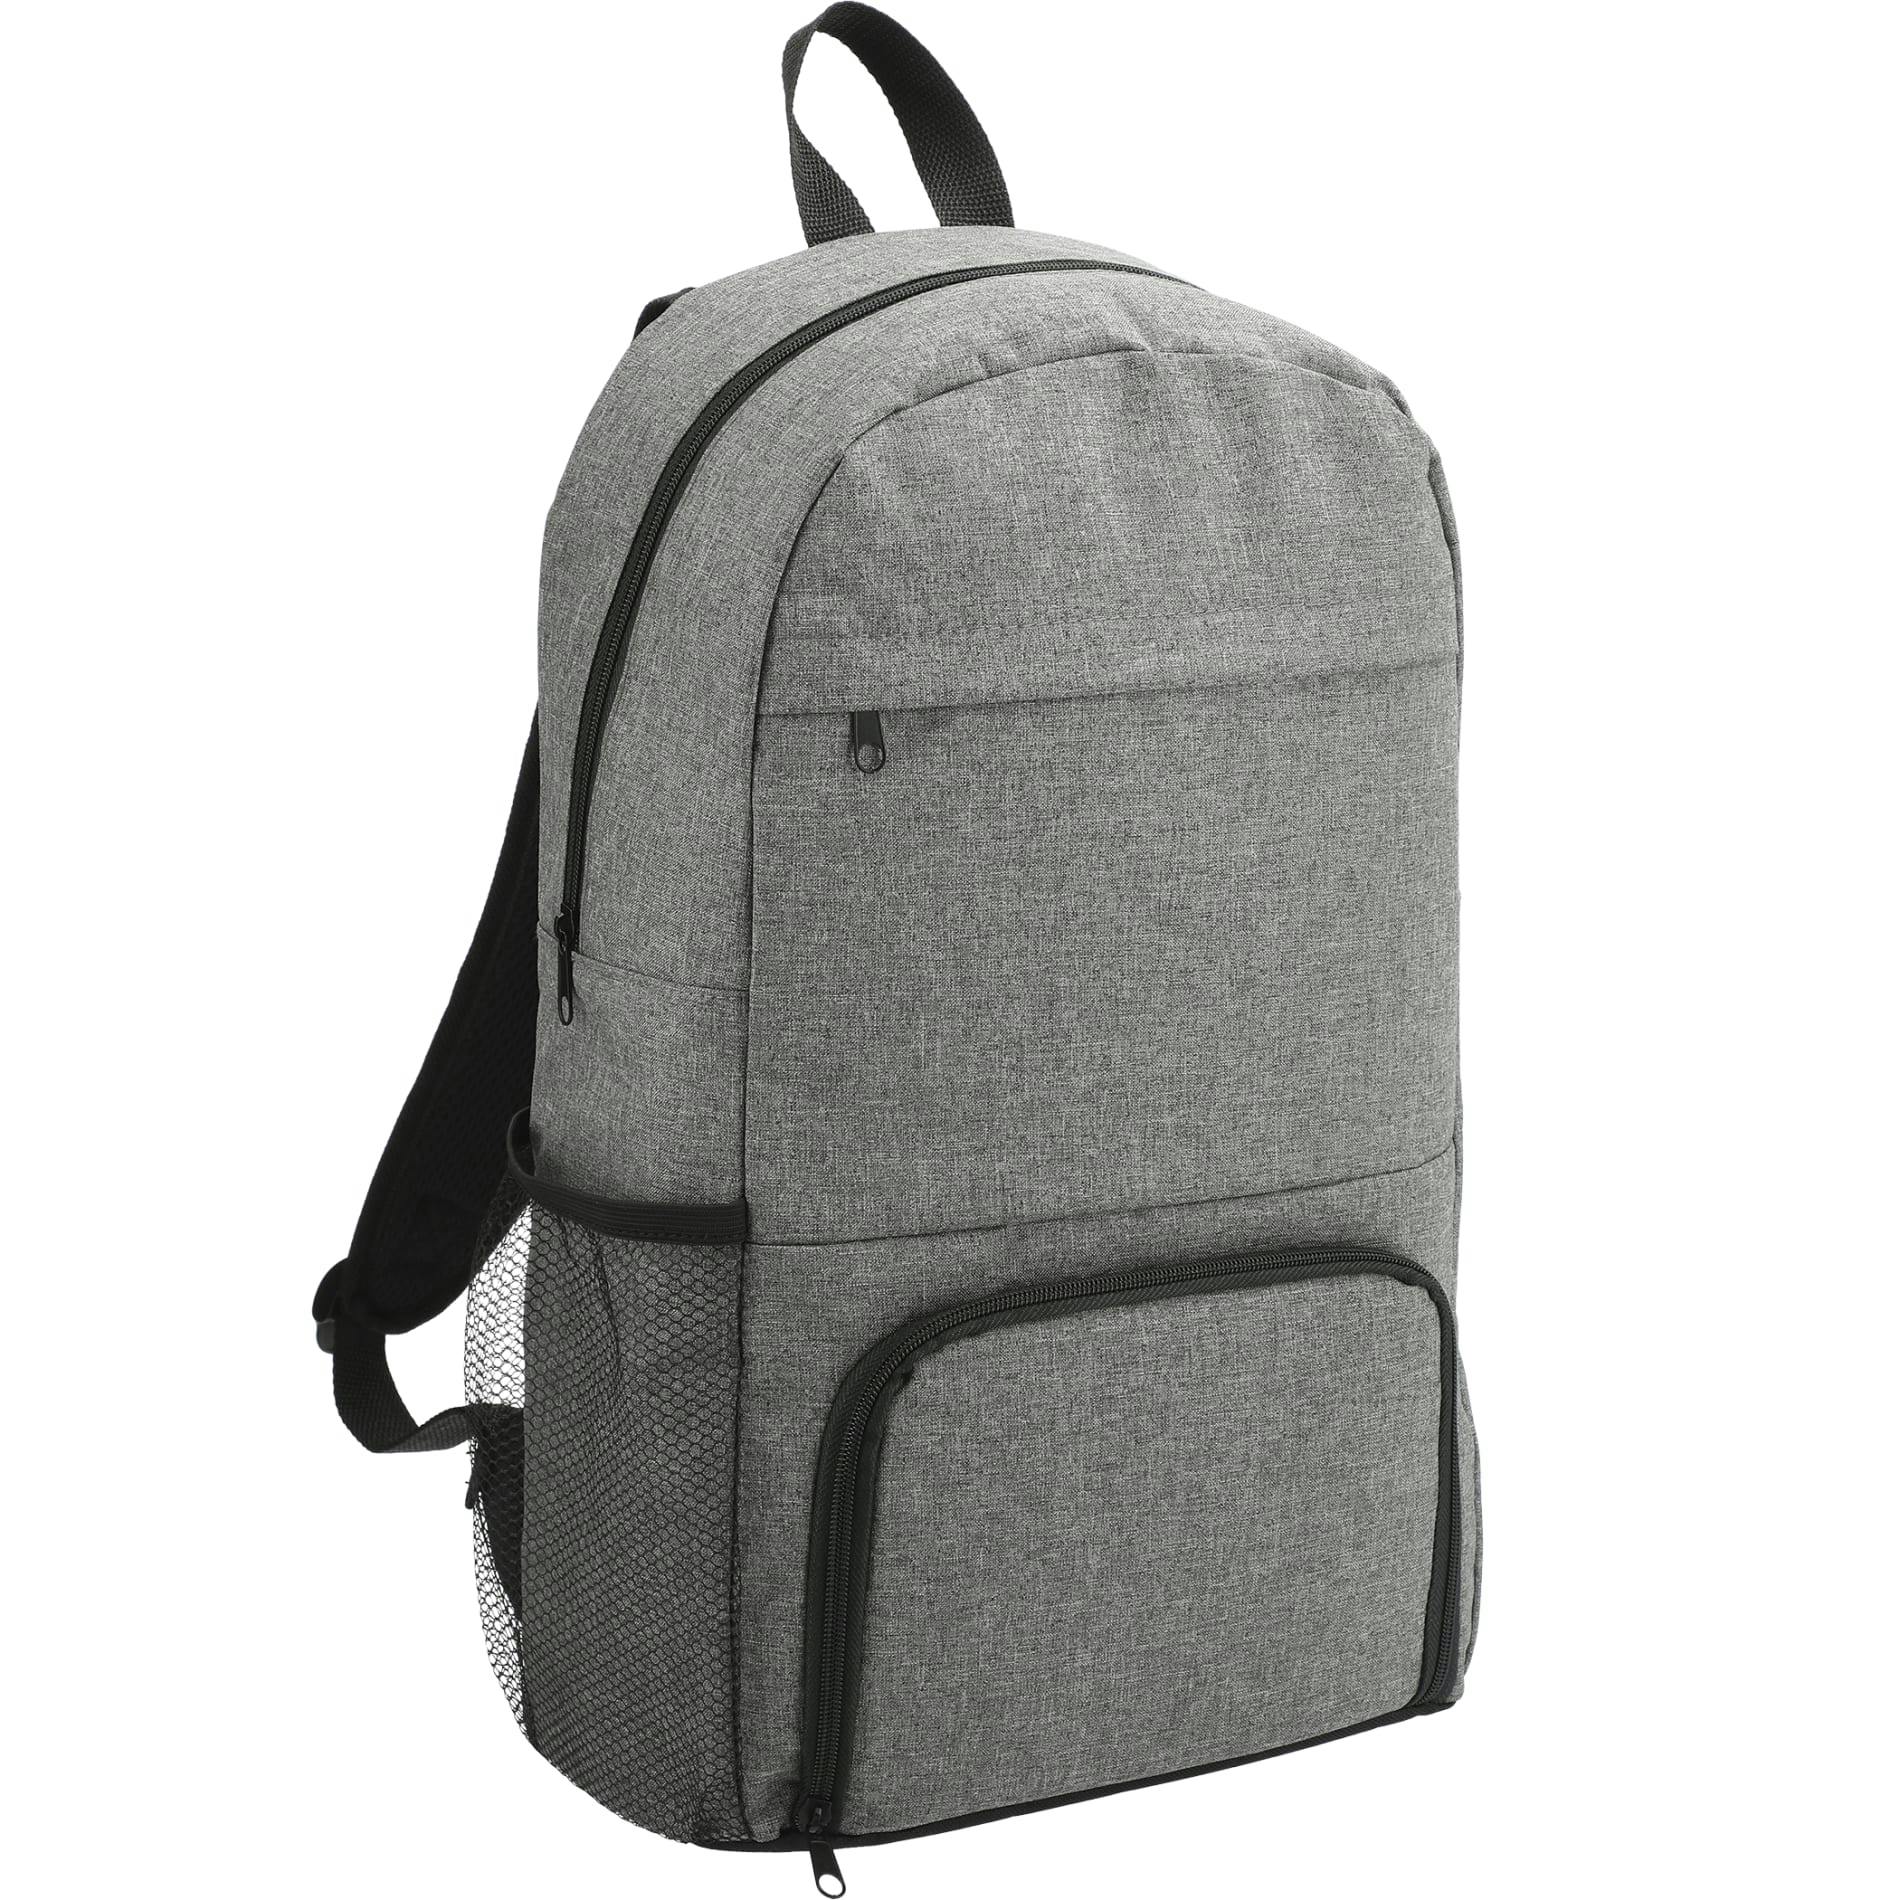 Essential Insulated 15" Computer Backpack - additional Image 4